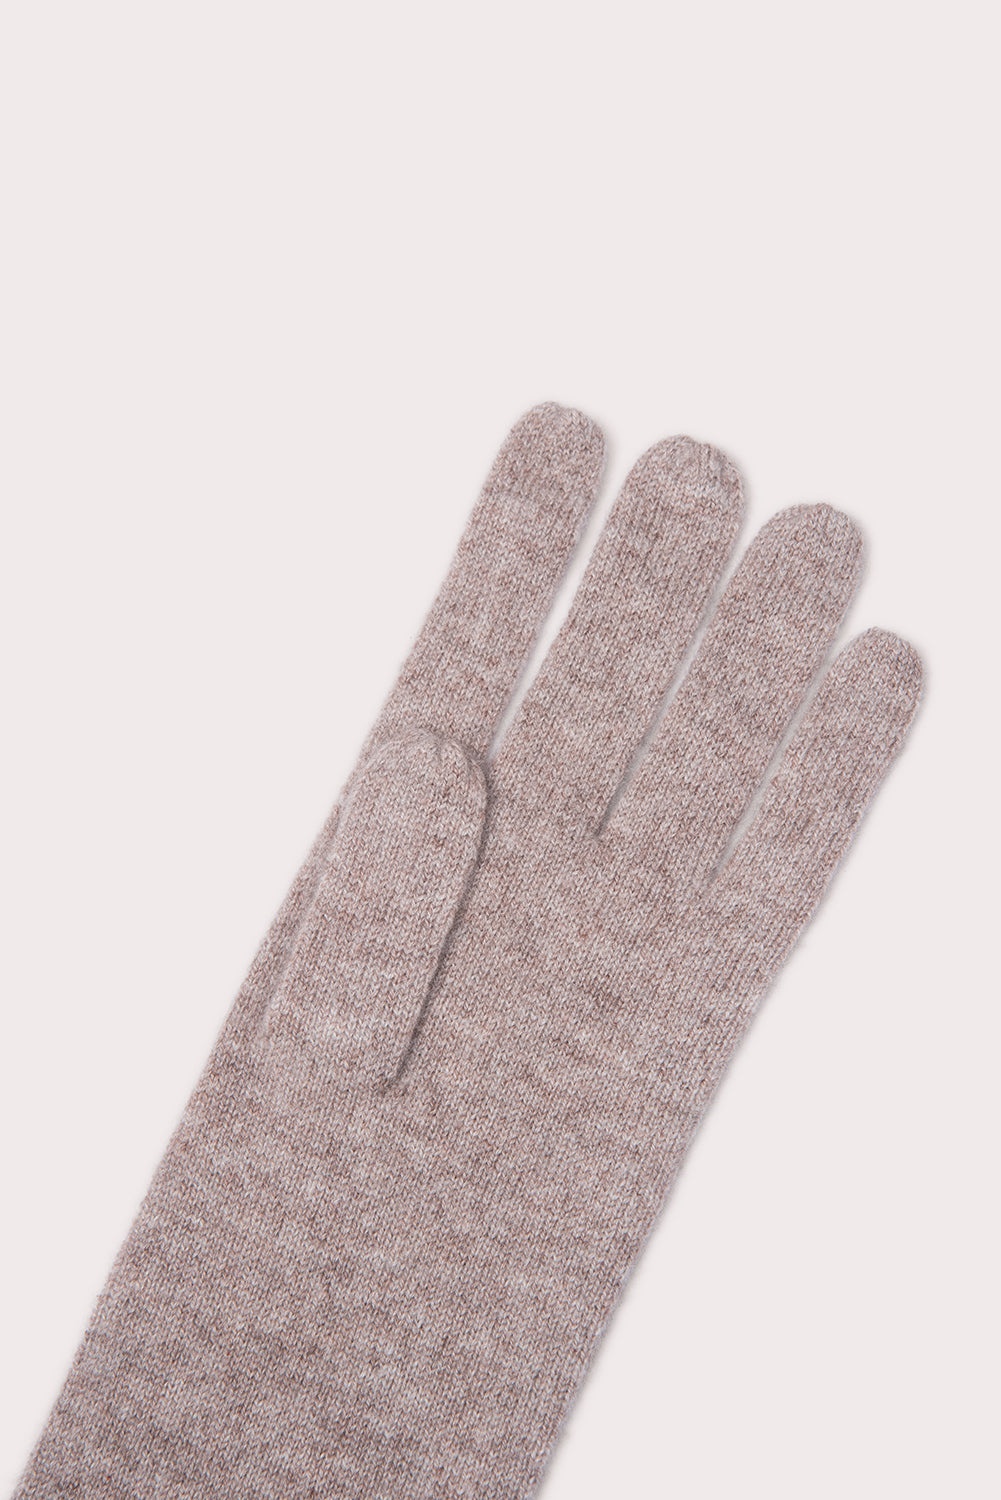 LINZ GLOVES TAUPE CASHMERE - 2